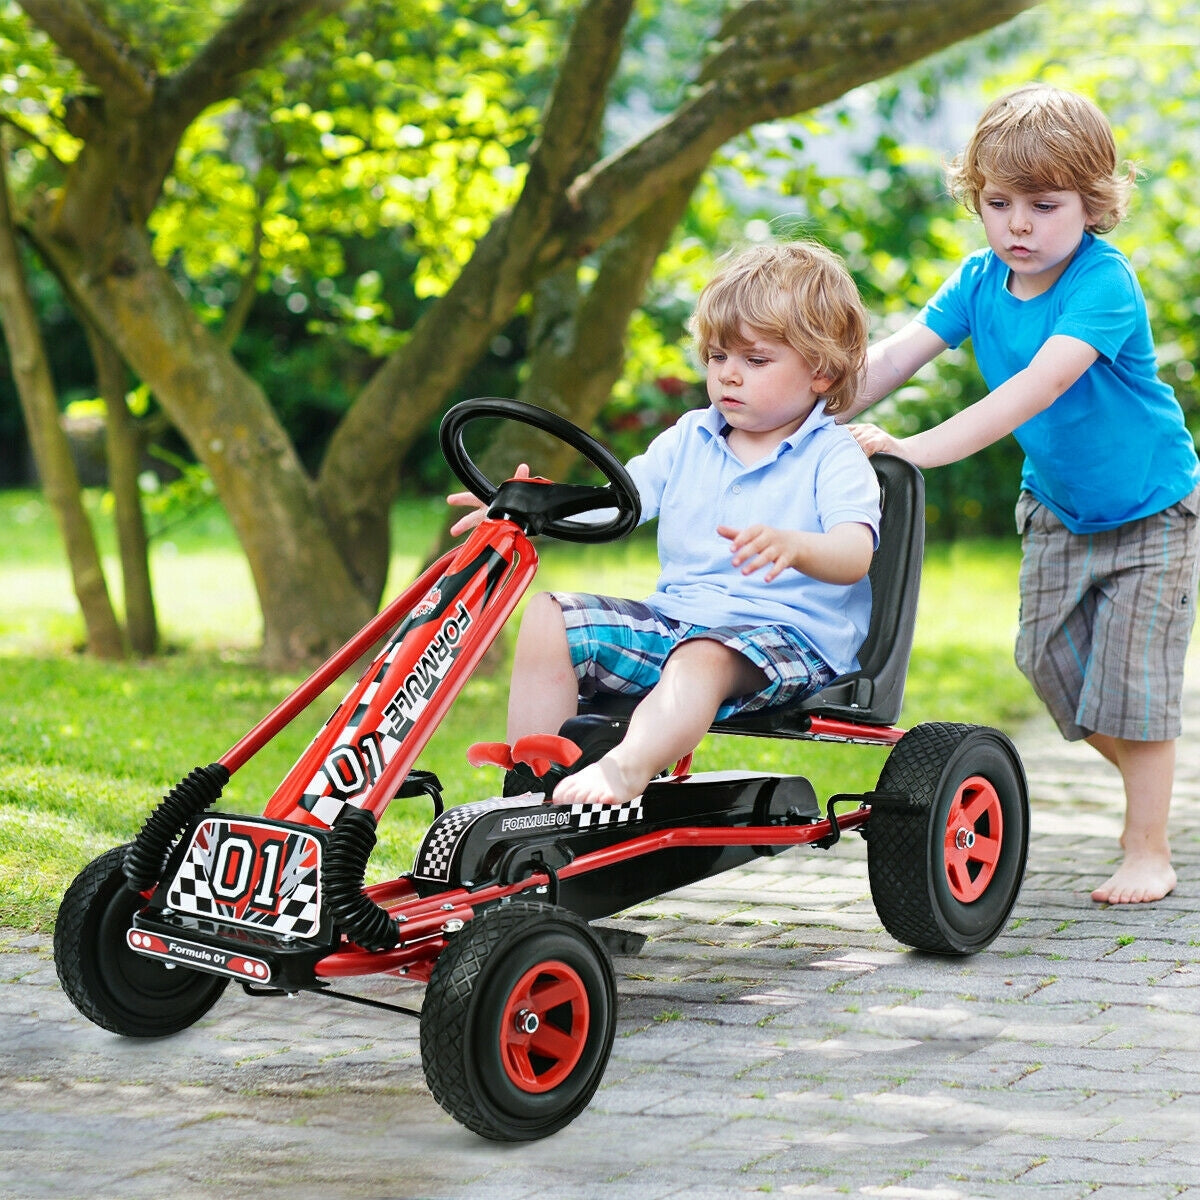 4-Wheel Kids Ride-On Pedal-Powered Bike Go Kart Racer Car - Outdoor Play Toy